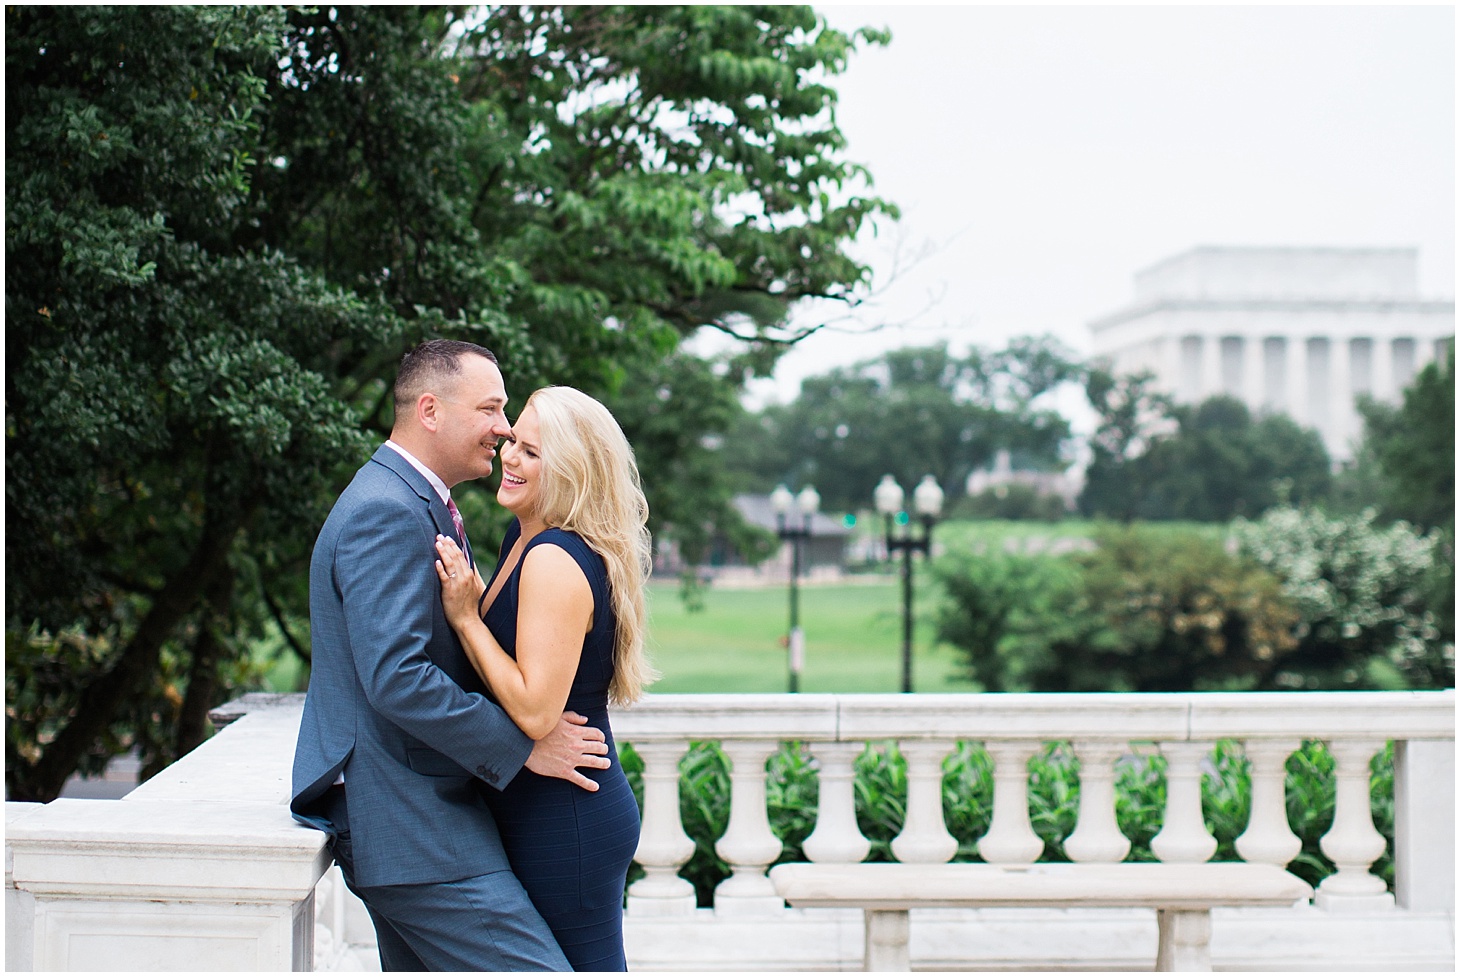 romantic-engagement-shoot-around-the-beautiful-d-c-monuments-by-sarah-bradshaw-photography_0017